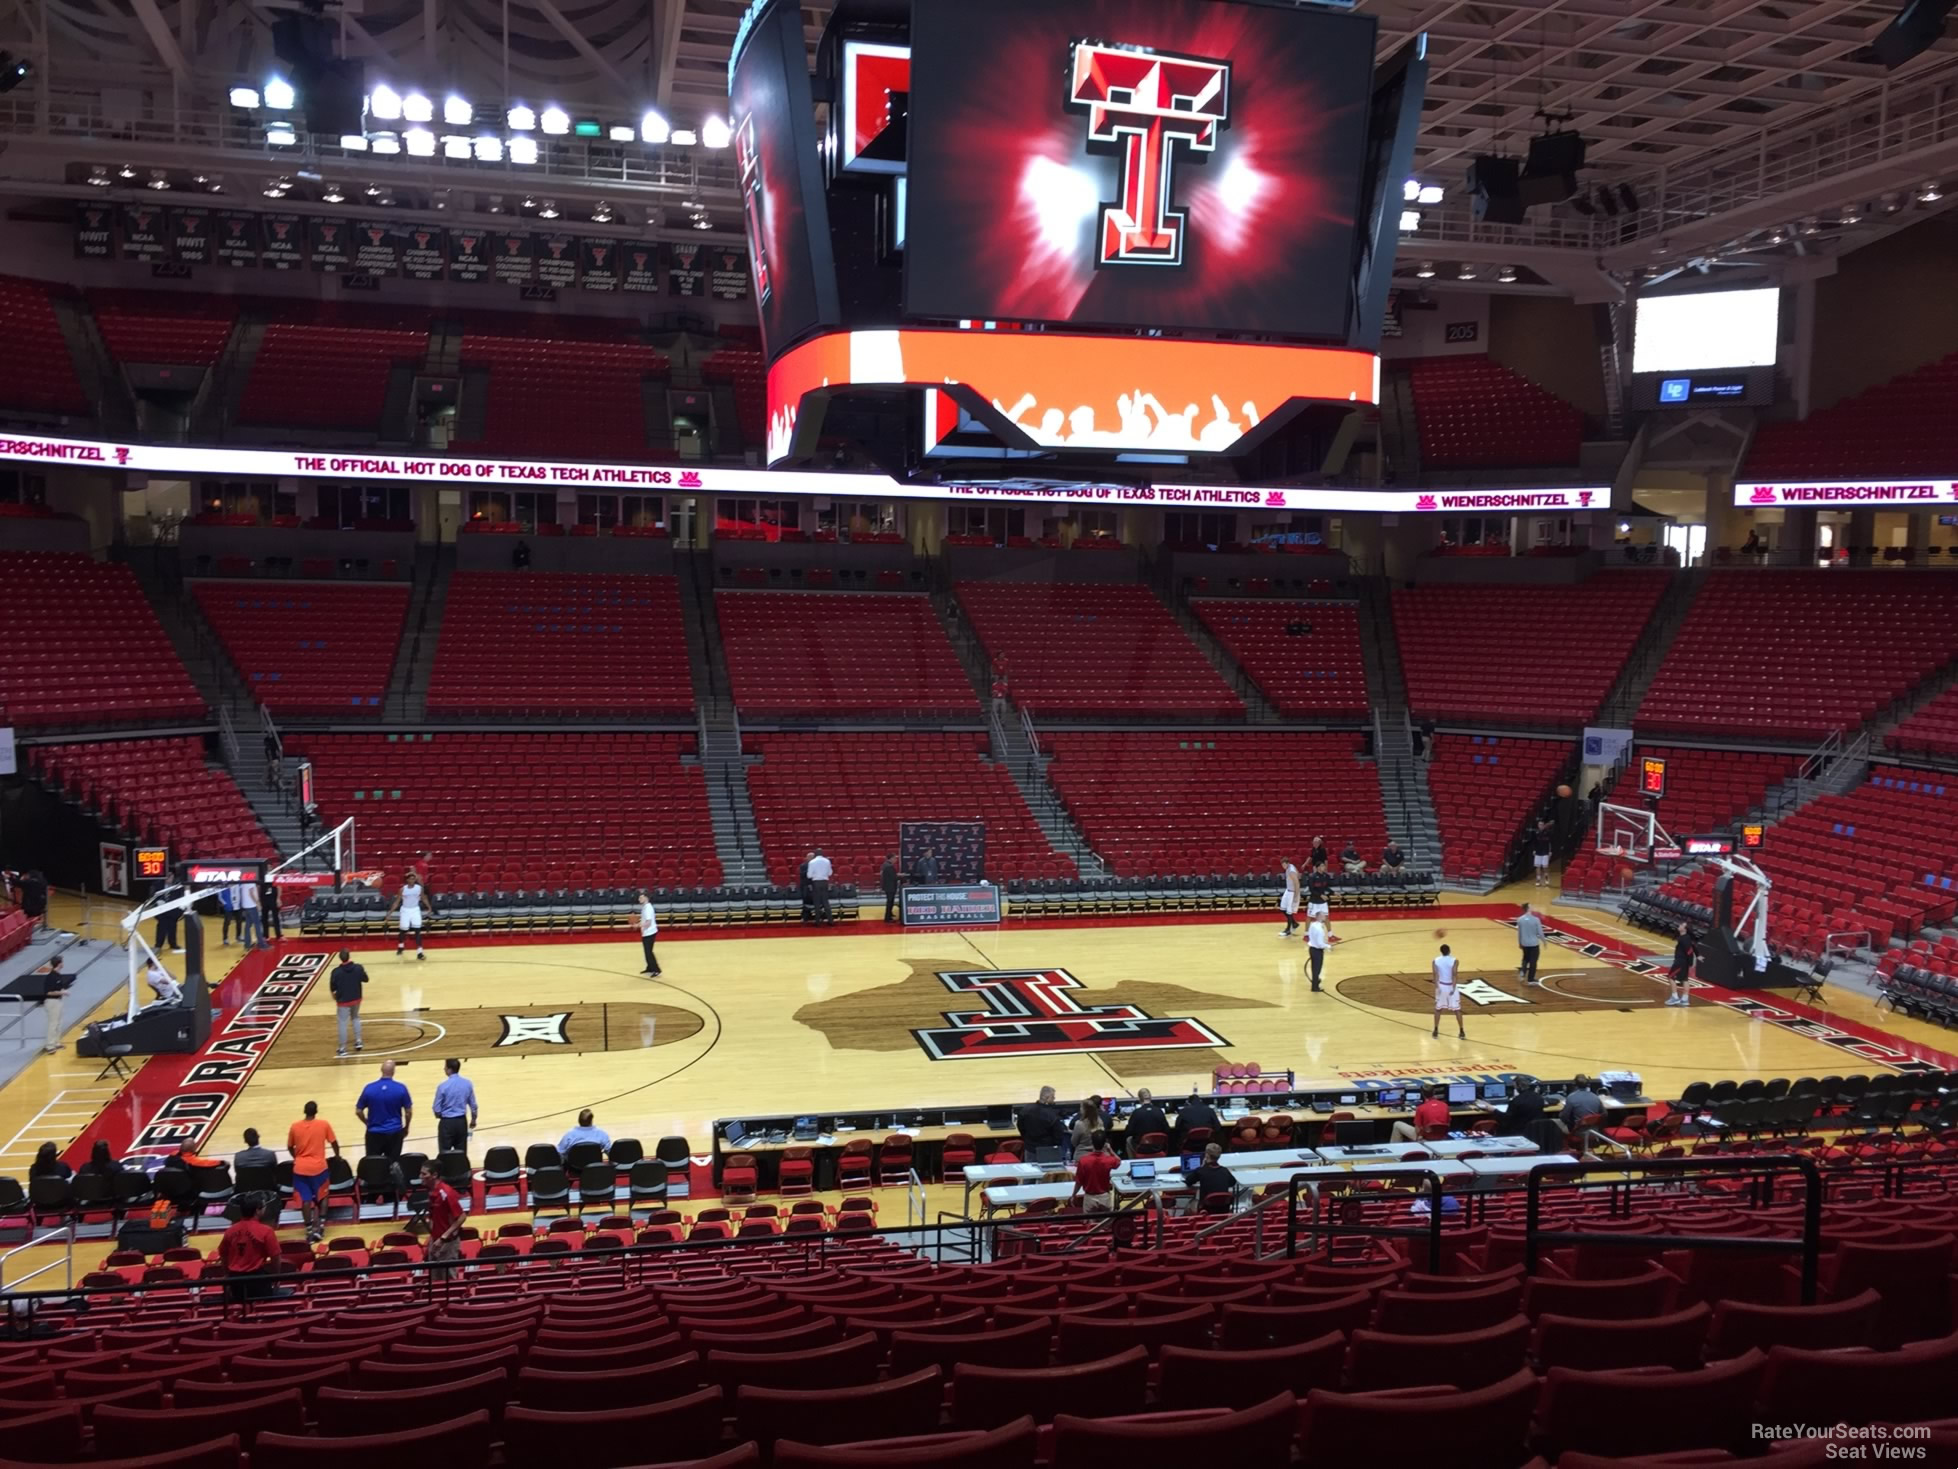 section 114, row 25 seat view  - united supermarkets arena